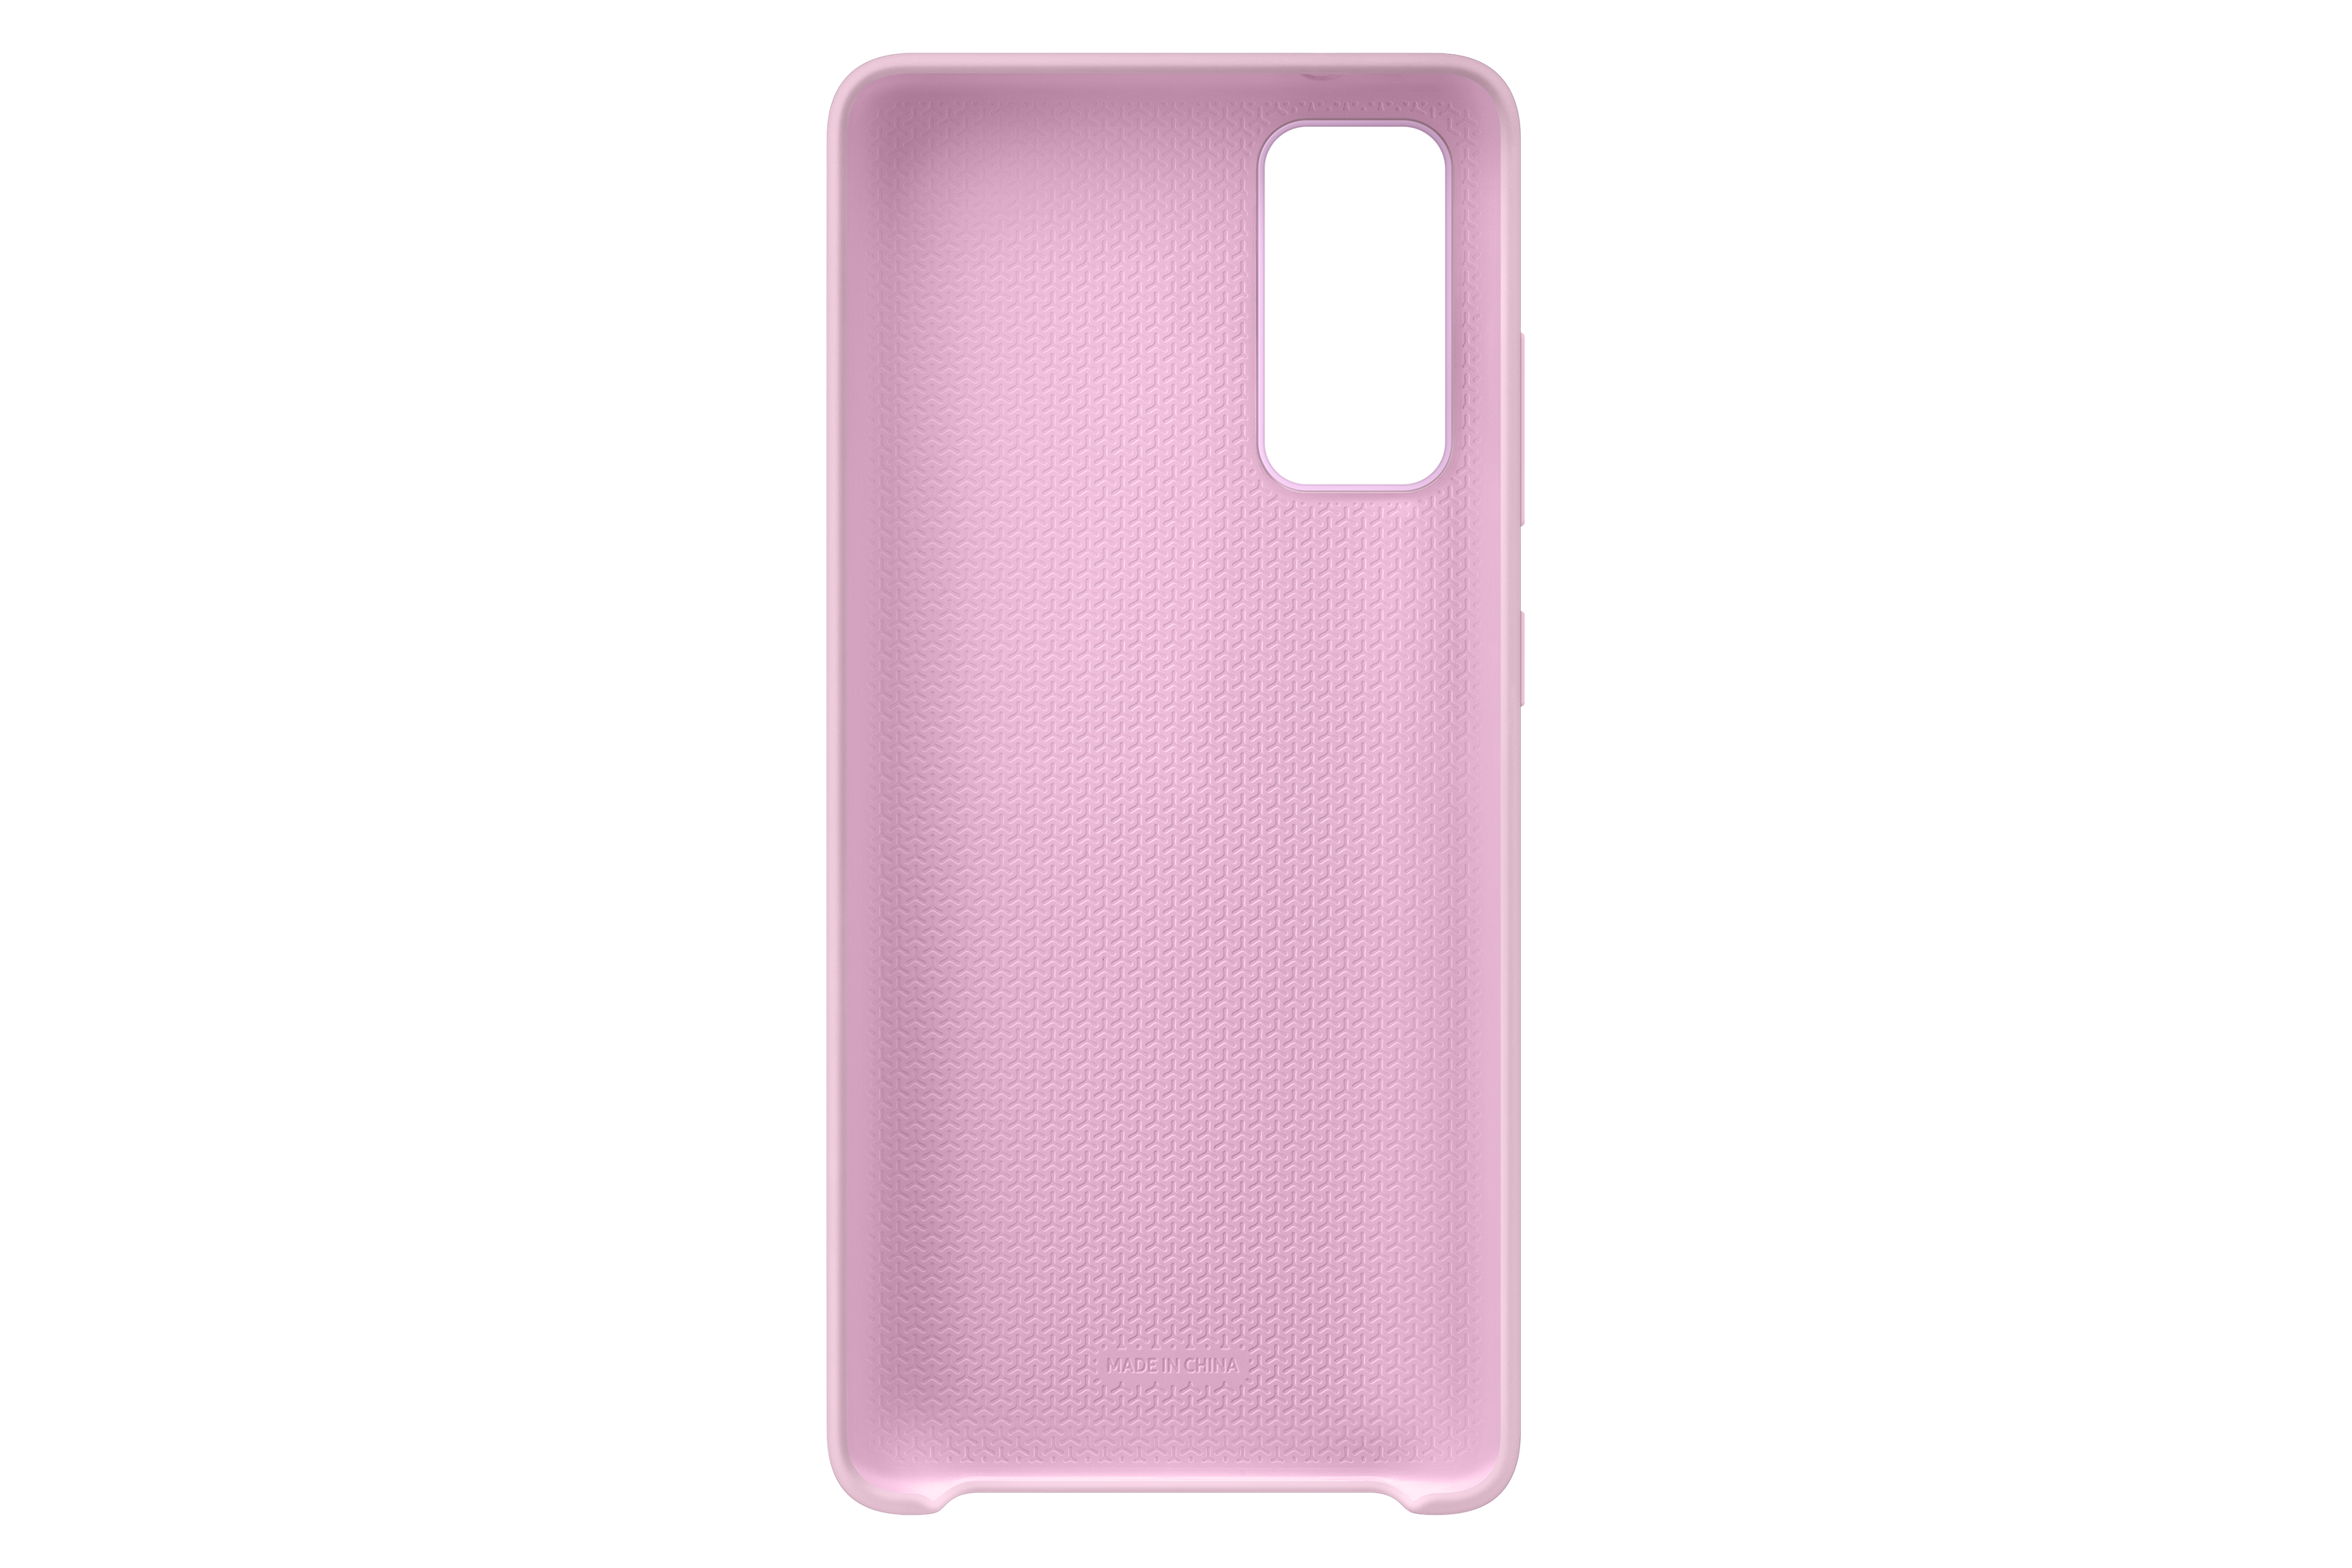 Thumbnail image of Galaxy S20 FE 5G Silicone Cover